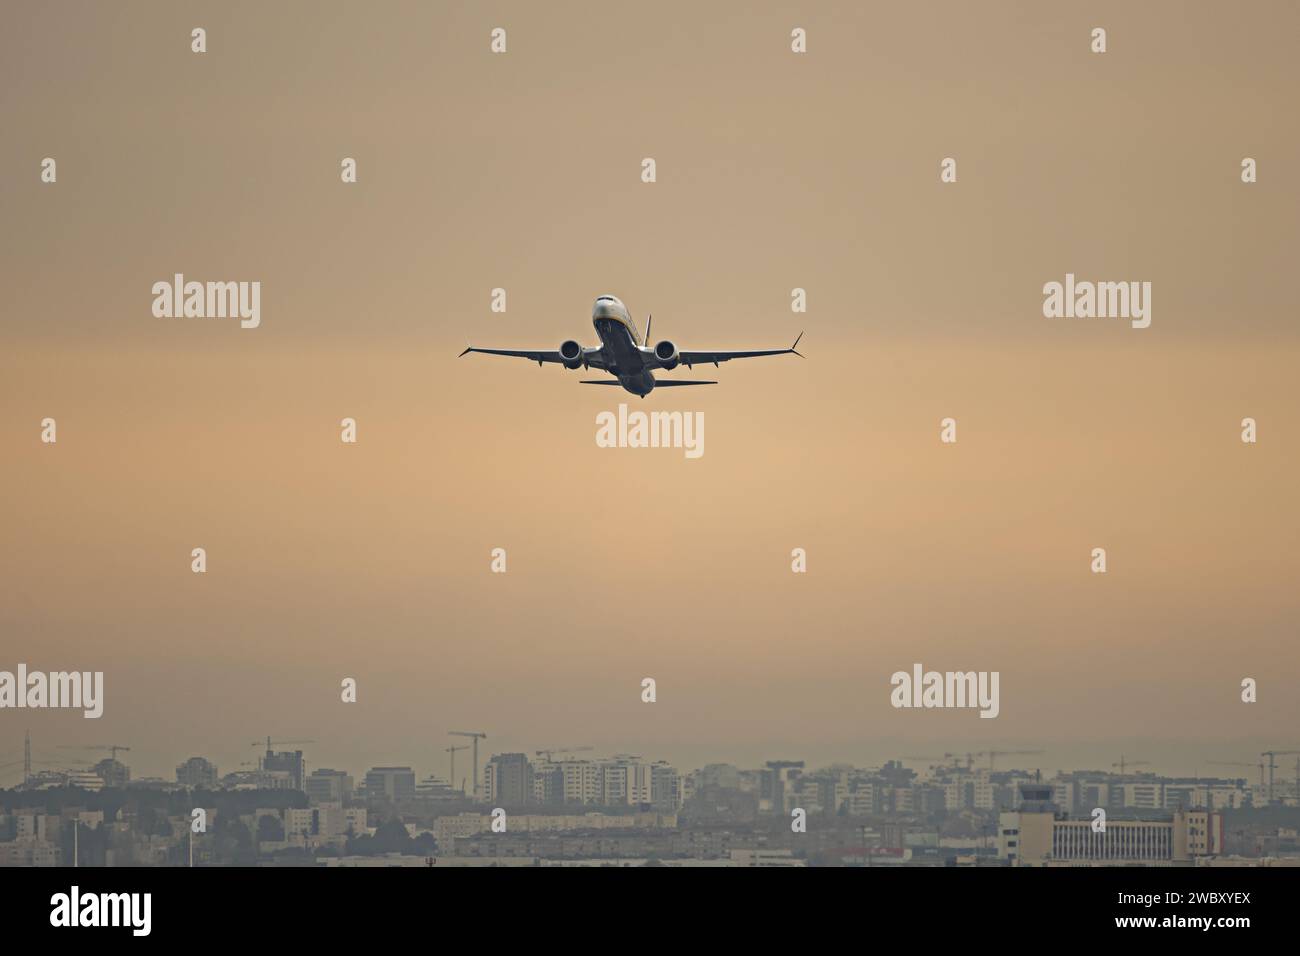 Flight of a commercial airplane over a city on a warm-colored afternoon Stock Photo